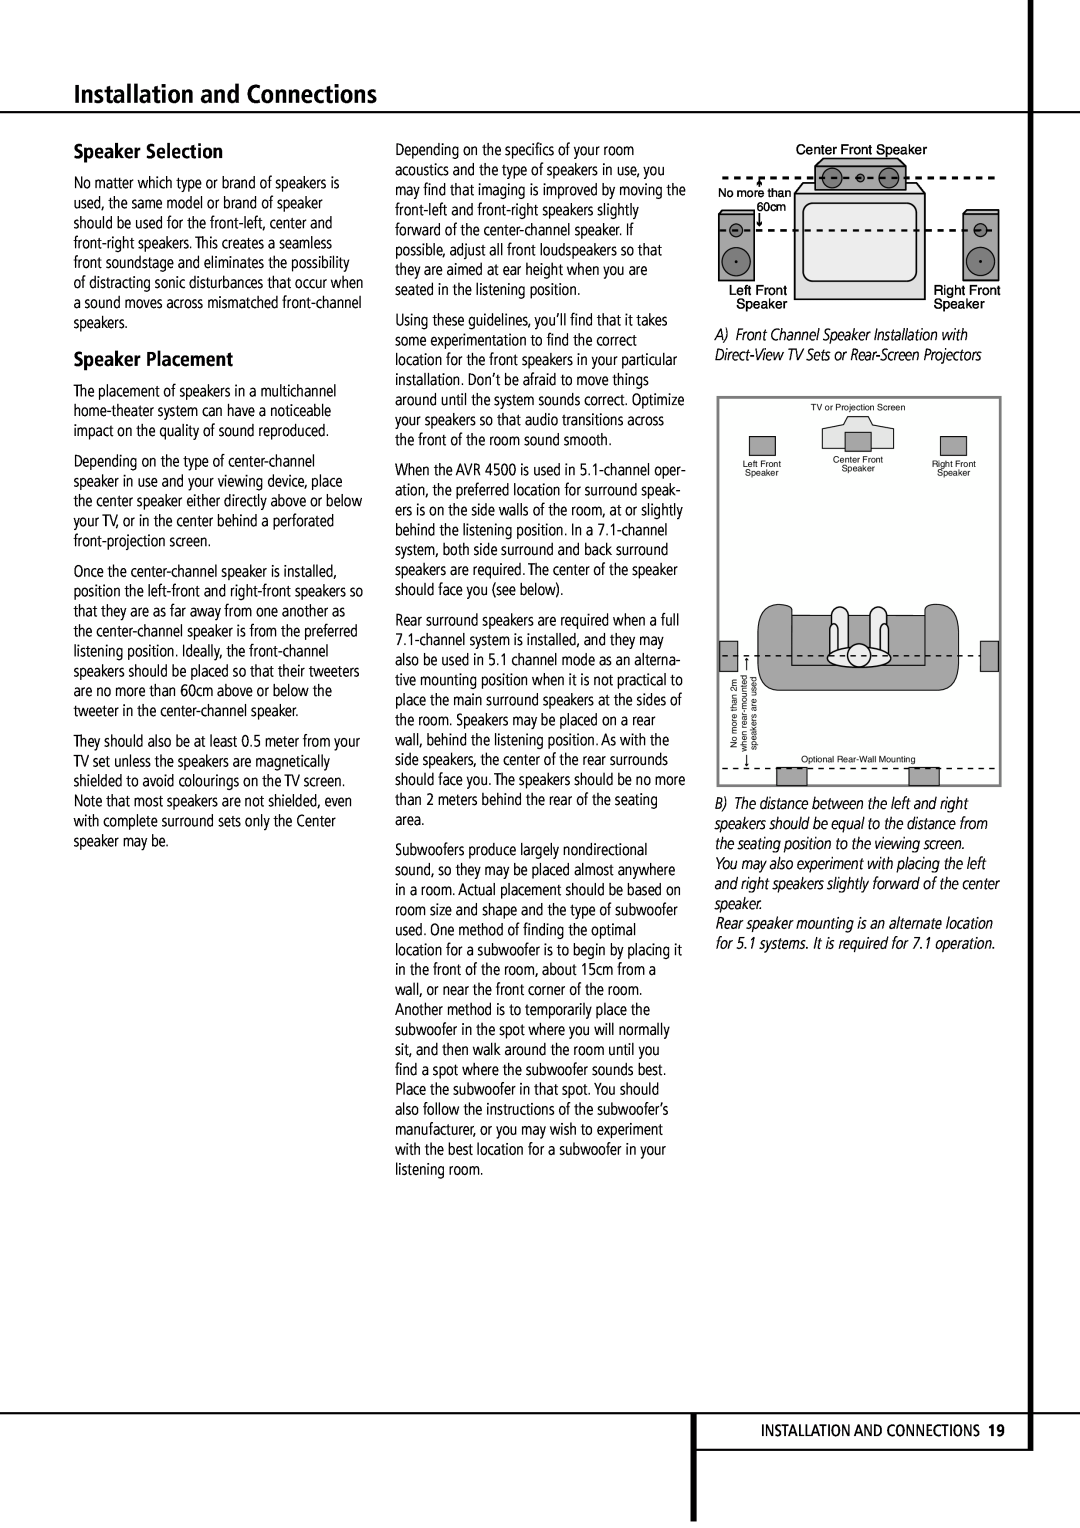 Harman-Kardon AVR4500 owner manual Speaker Selection, Speaker Placement, Installation and Connections 